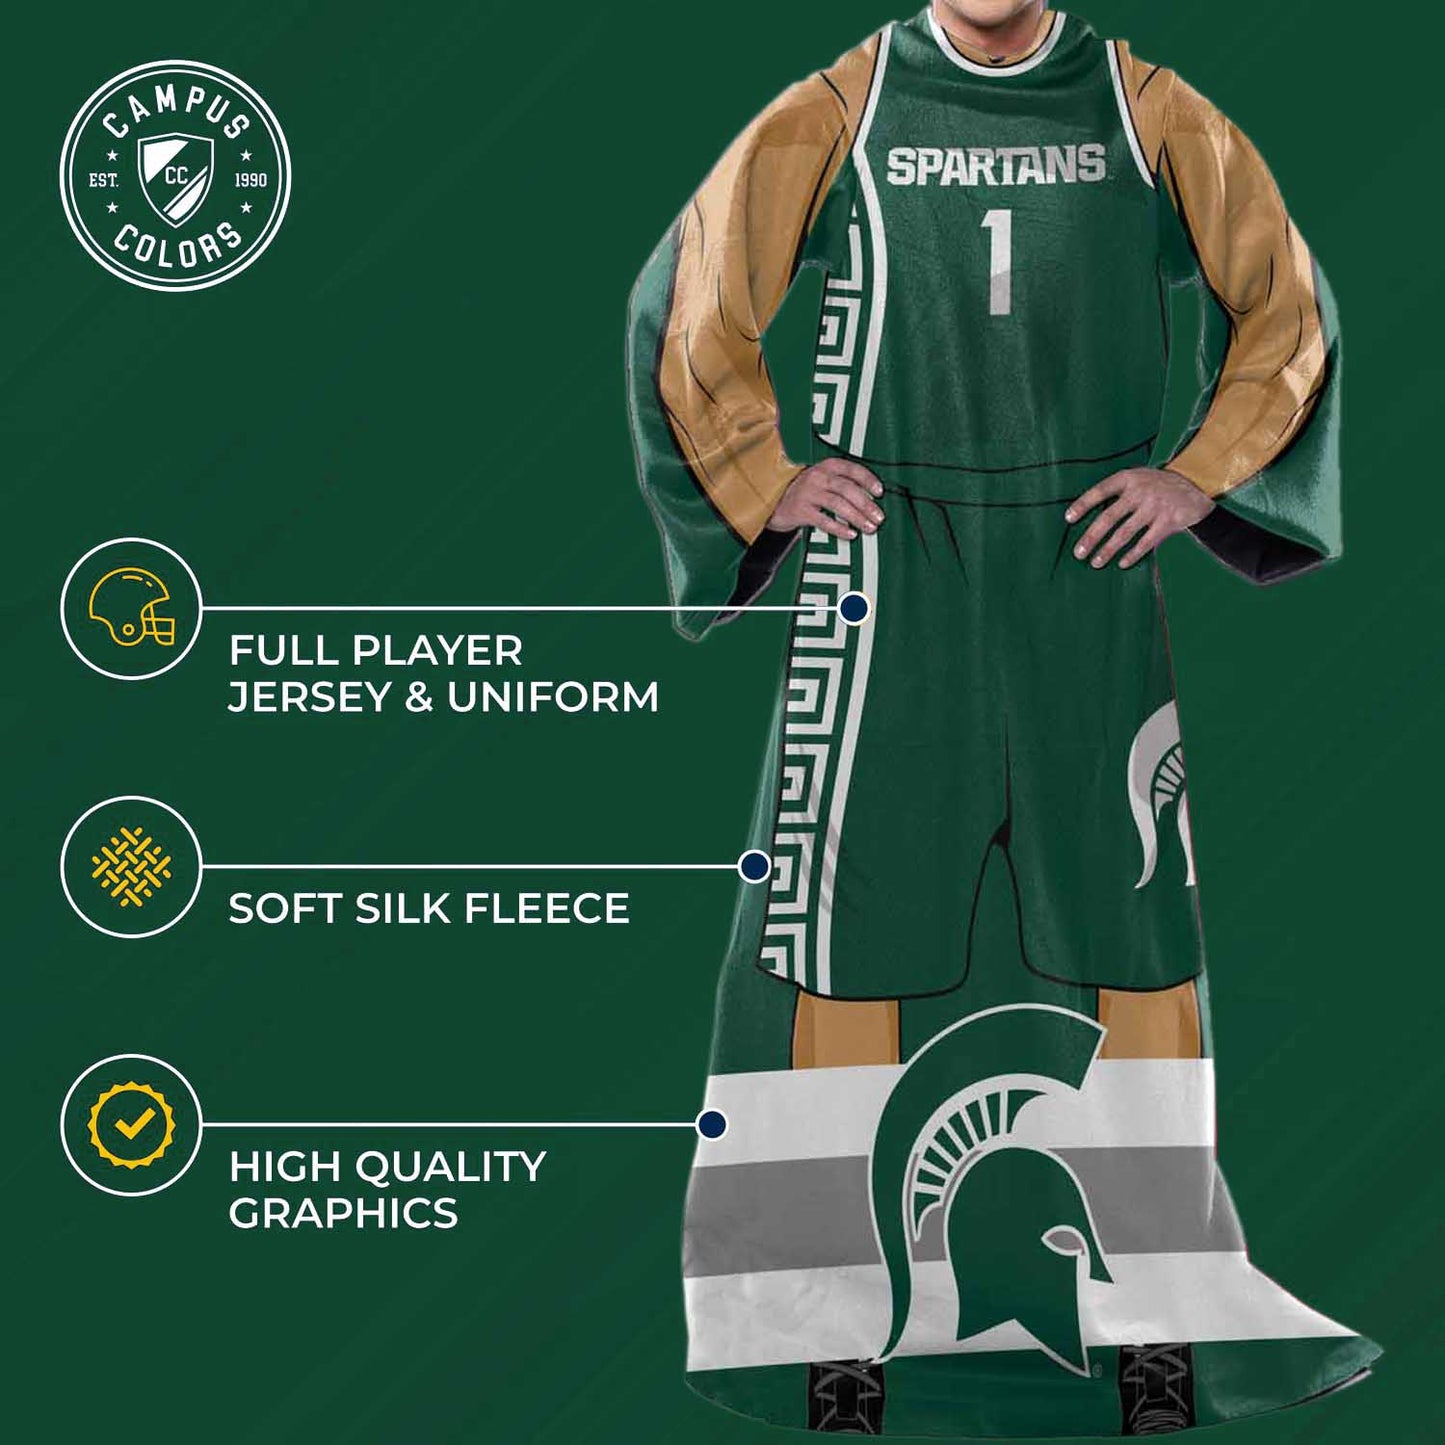 Michigan State Spartans NCAA Team Wearable Blanket with Sleeves - Green